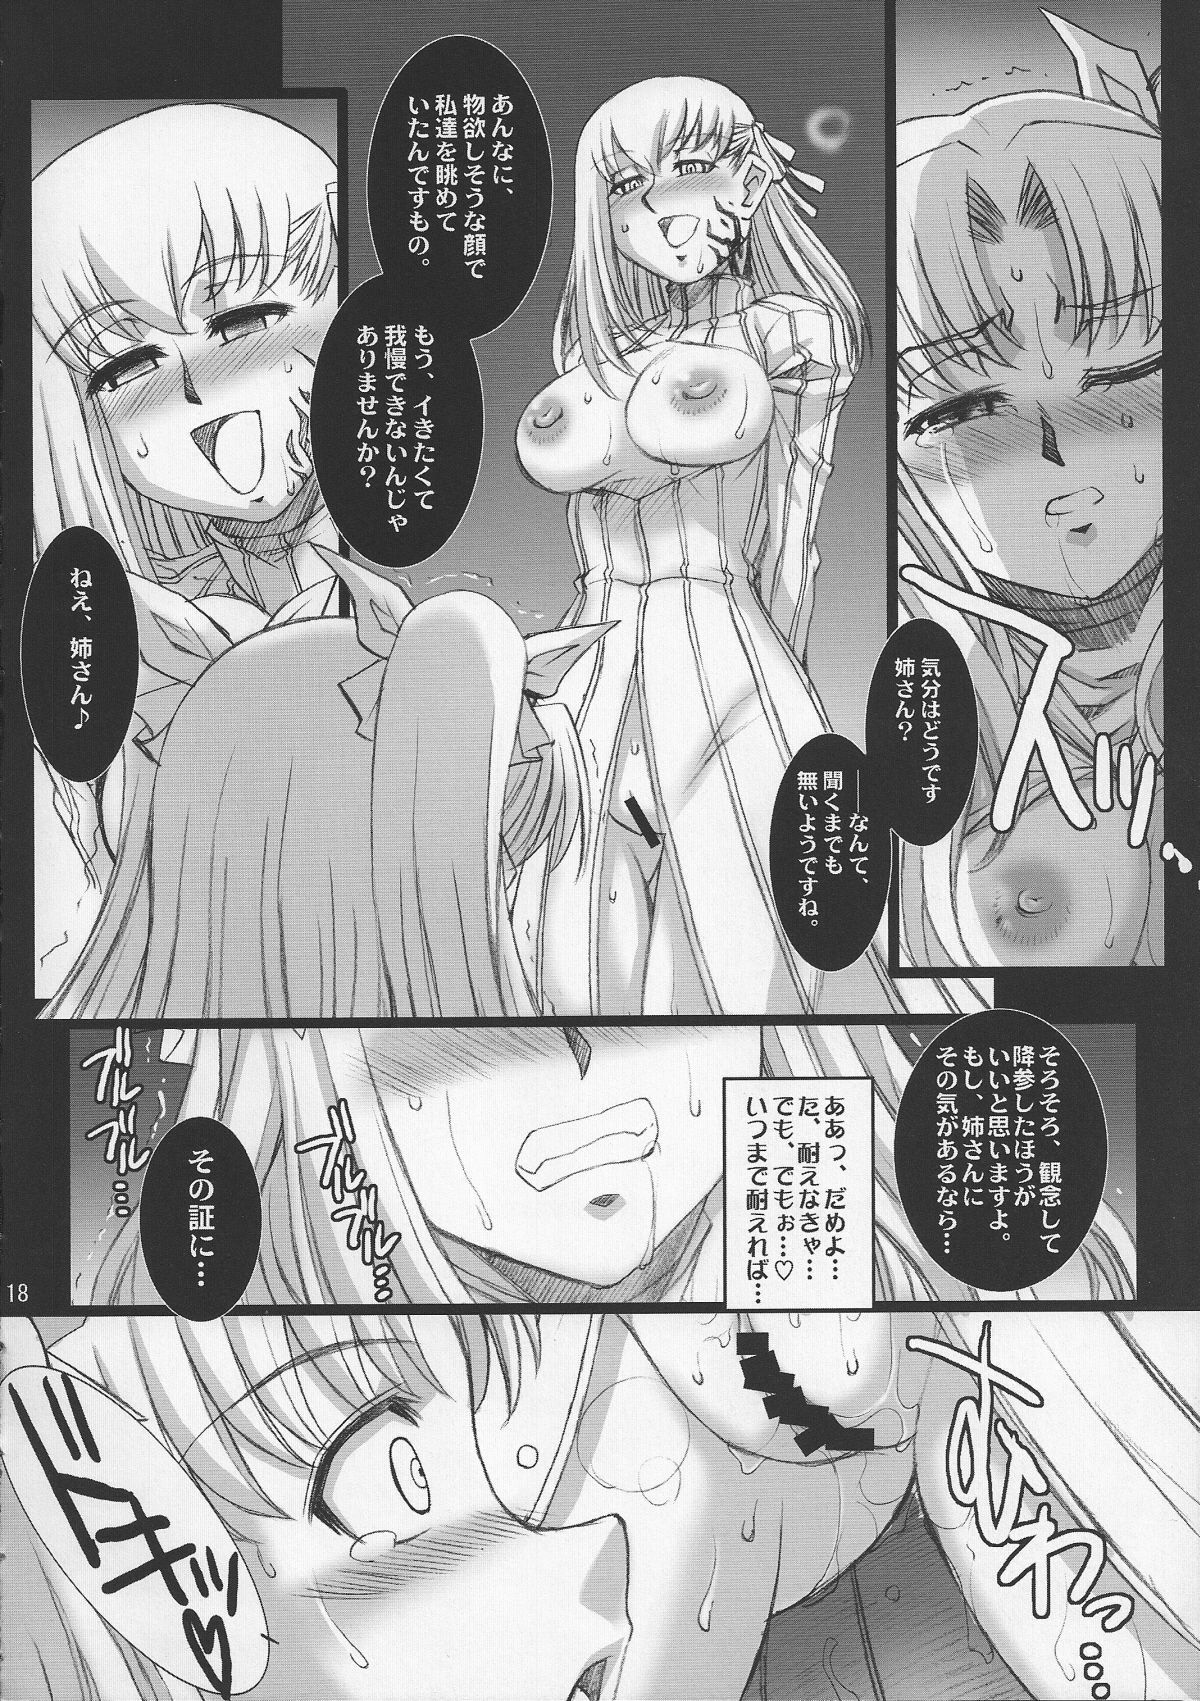 (COMIC1☆2) [H.B (B-RIVER)] Red Degeneration -DAY/3- (Fate/stay night) page 17 full